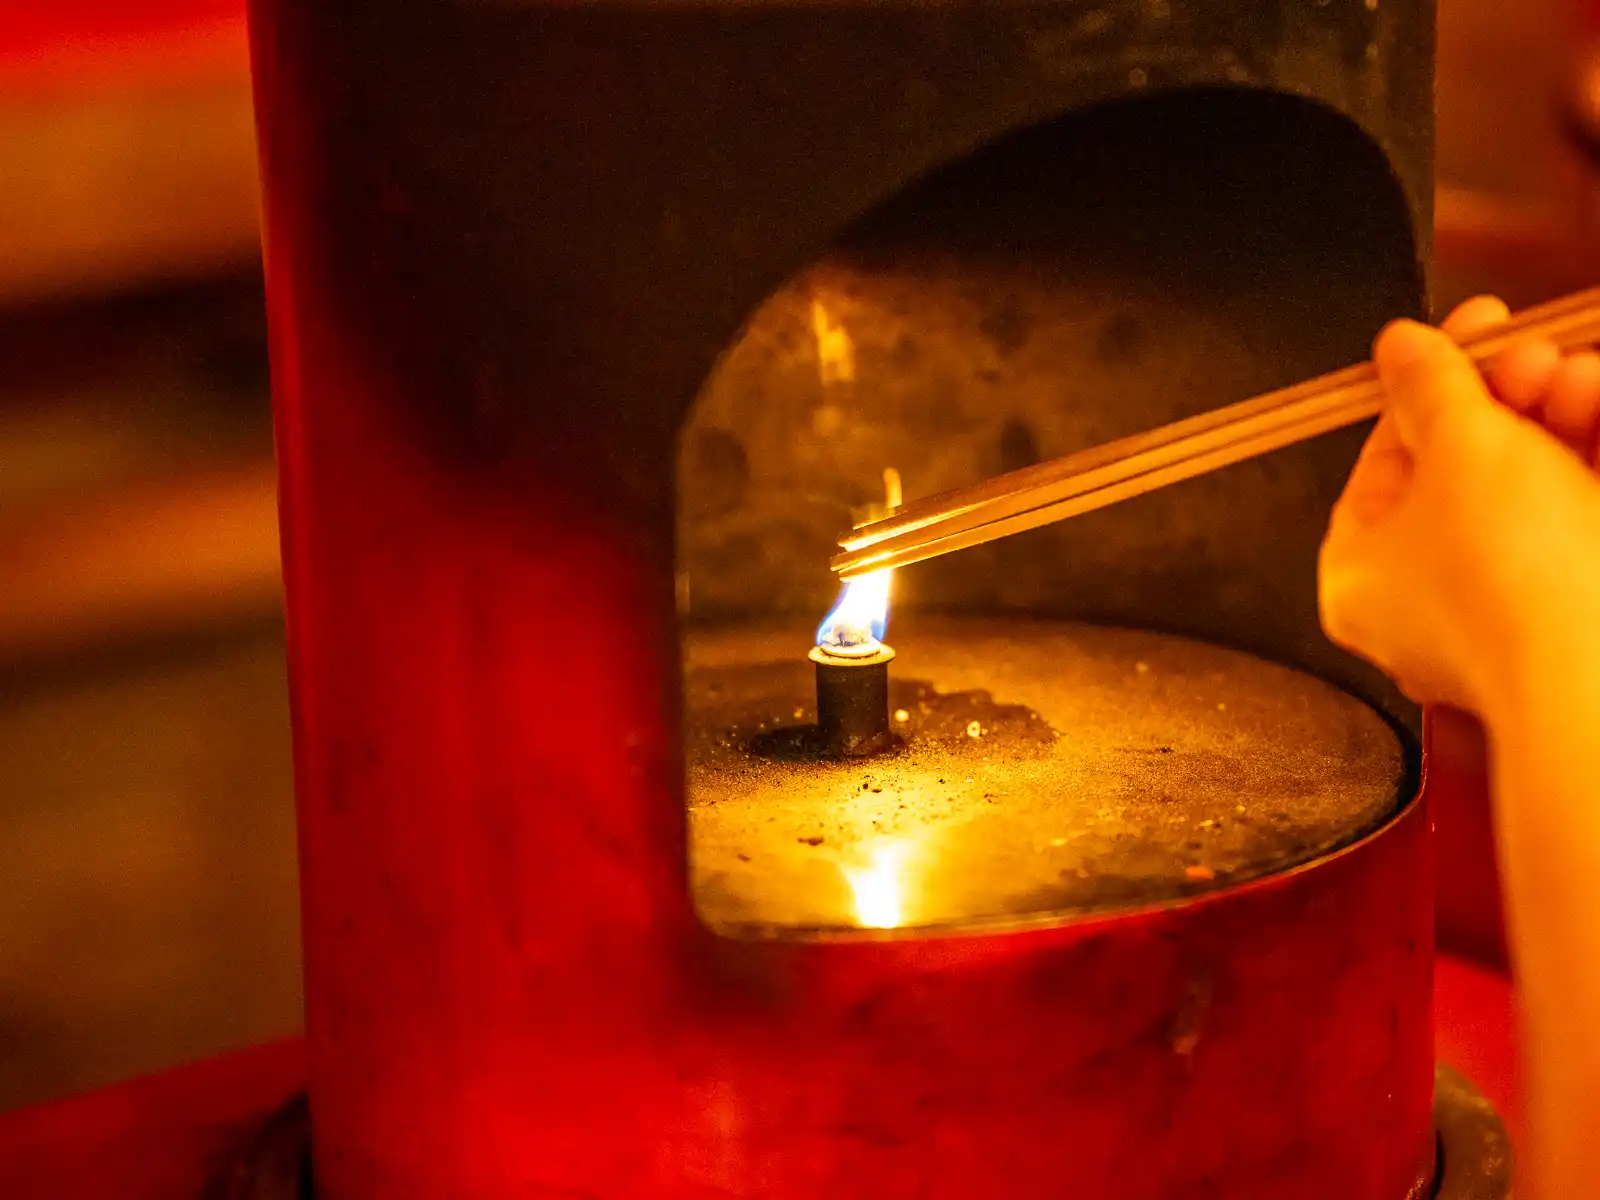 Sticks of incense are being lit over a candle.